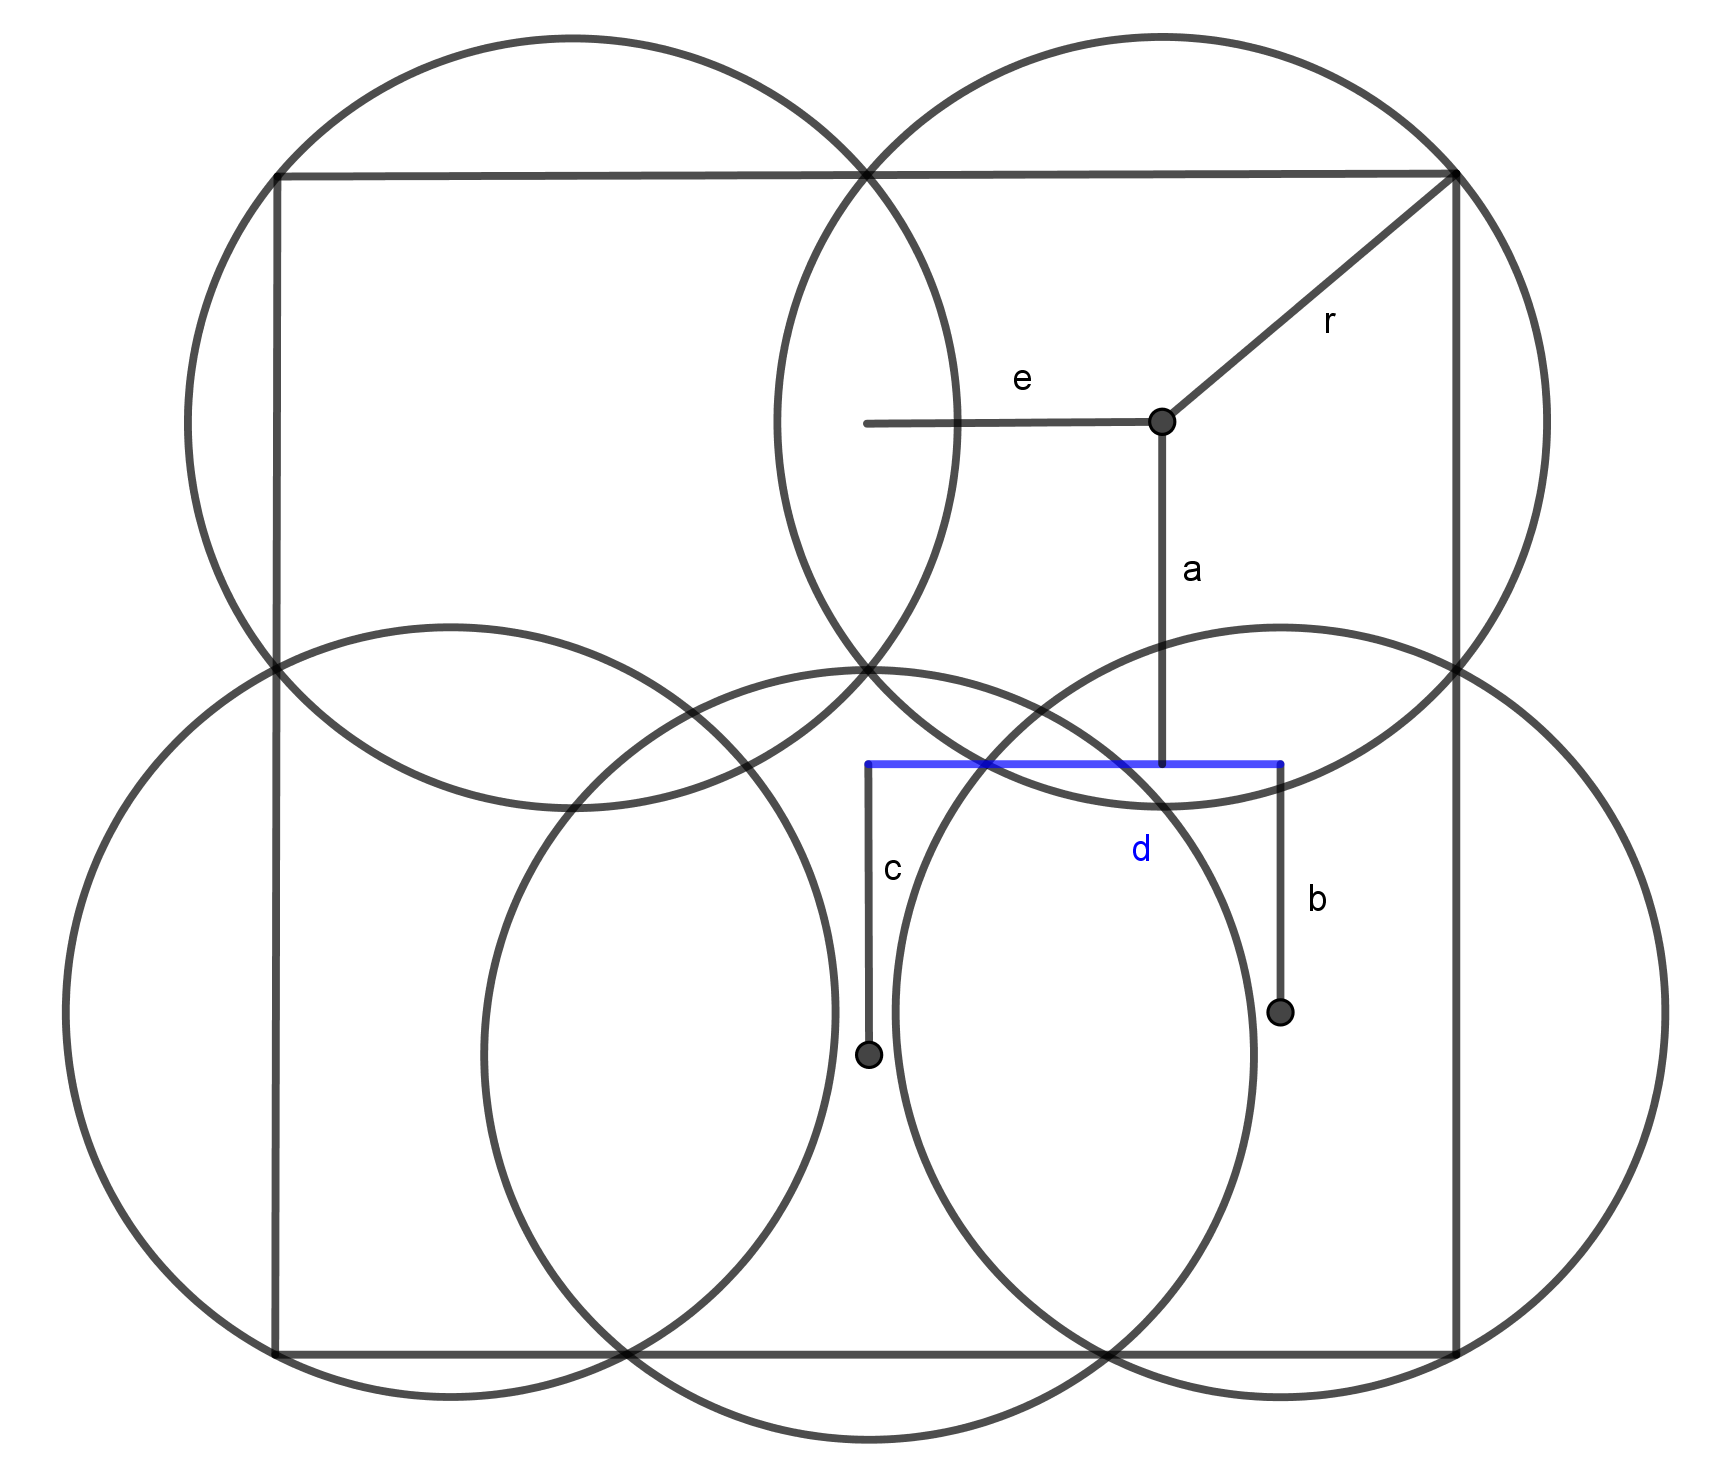 A Geogebra drawing of 5 disks of minimal radius covering the unit square.